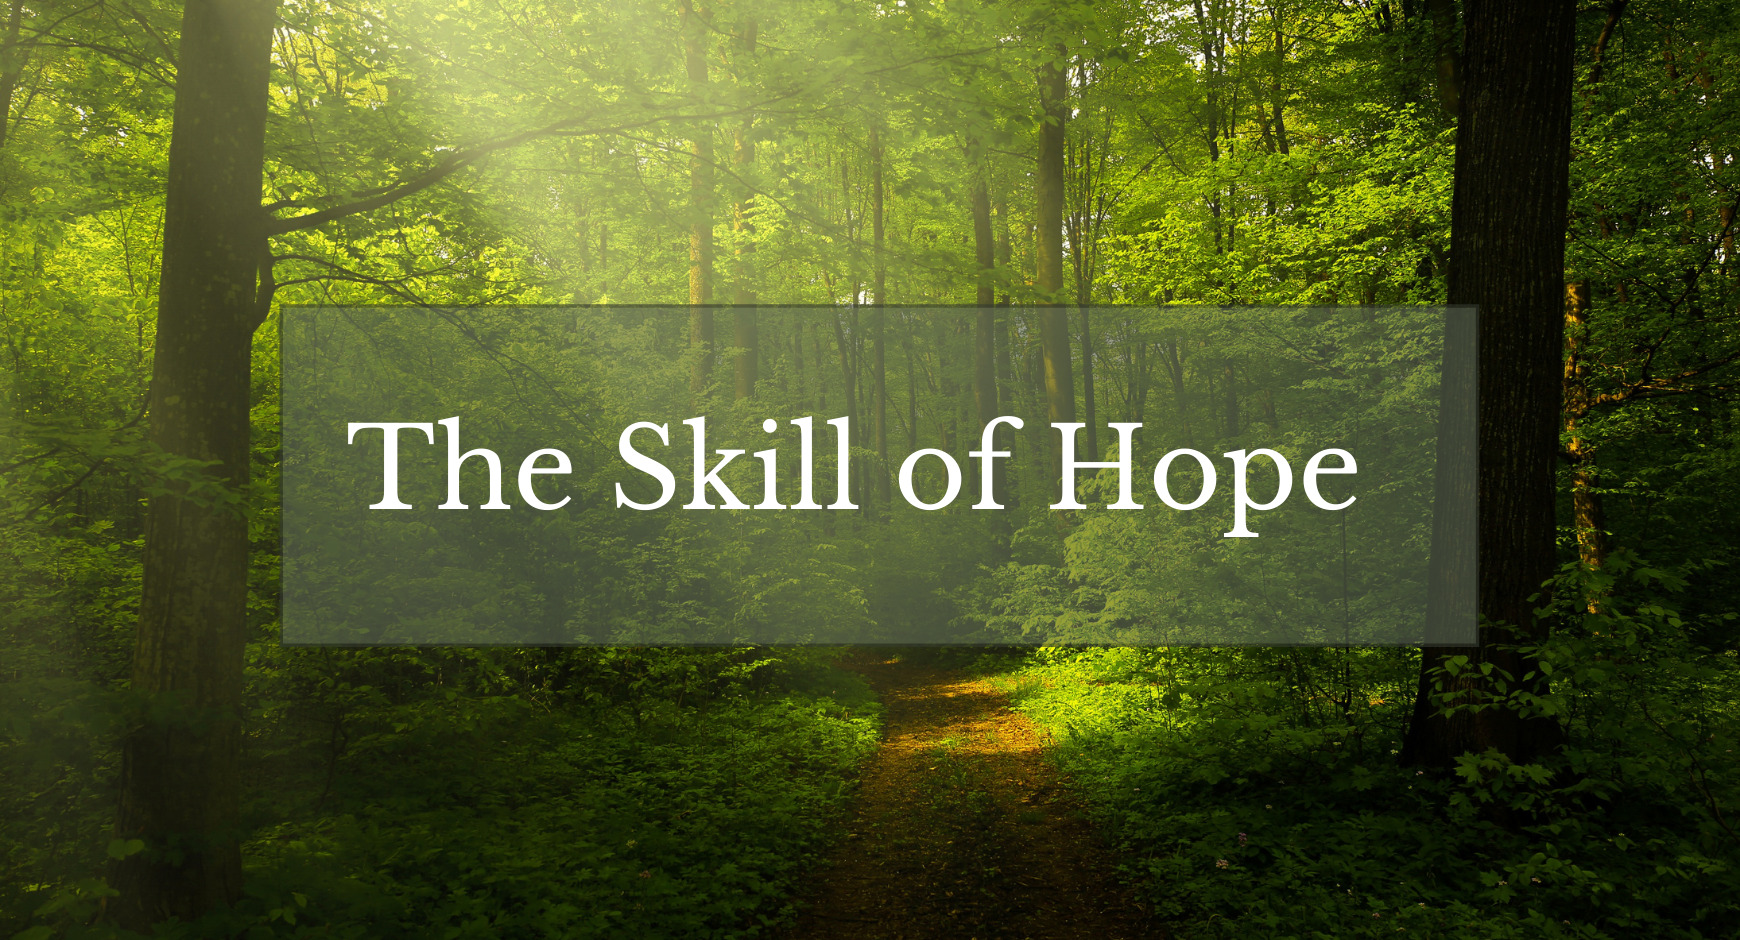 A view of a forest clearing with a ray of sunlight shining through the trees under words that read "The Skill of Hope"